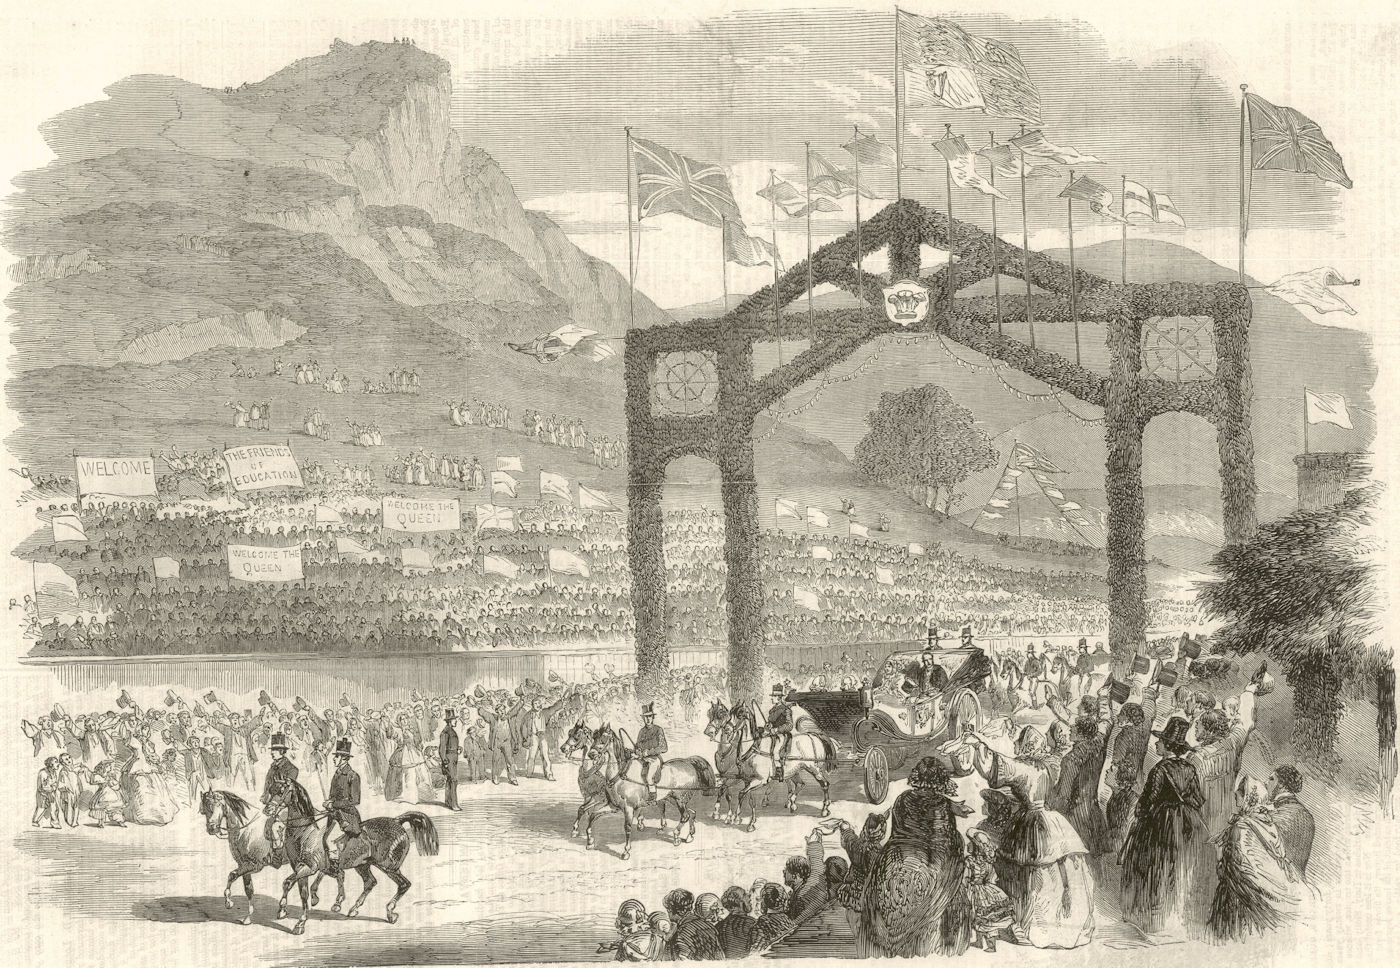 Associate Product Queen Victoria's Visit to North Wales - Her Majesty entering Bangor 1859